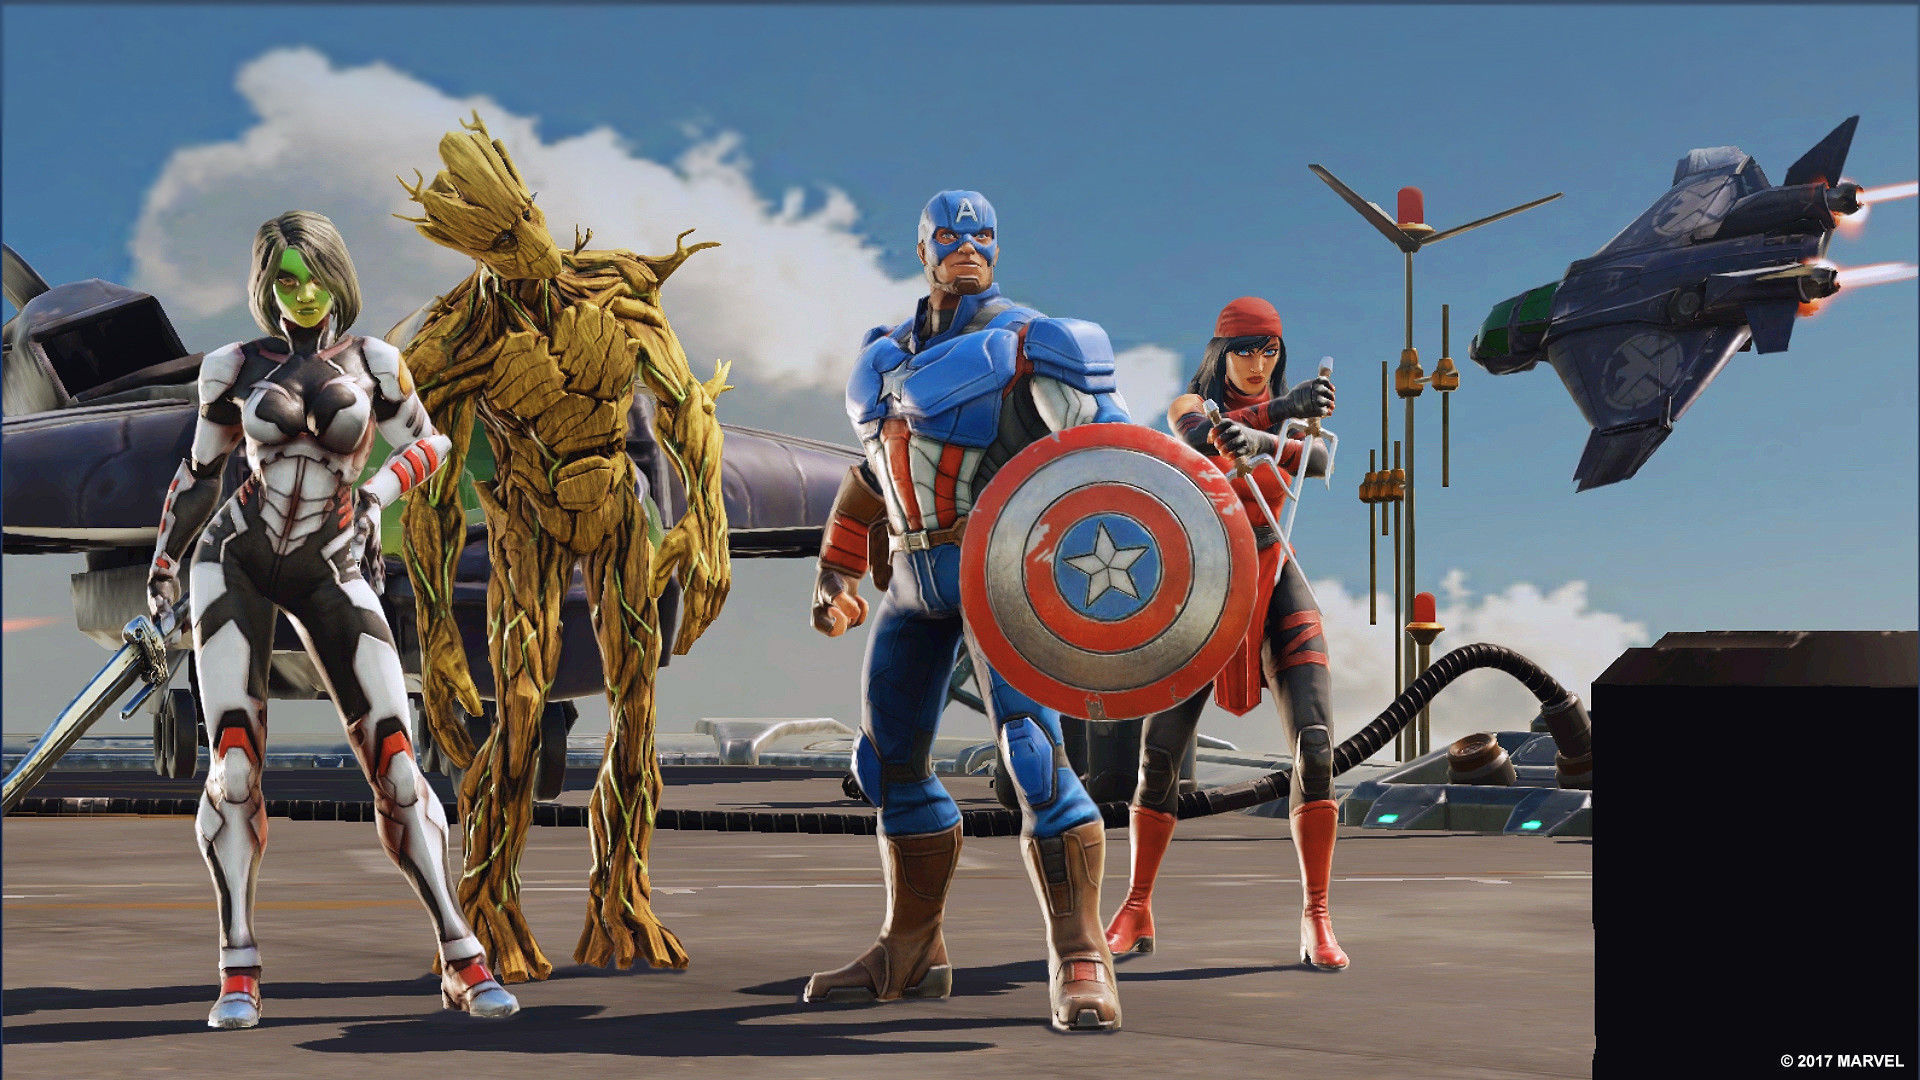 1920x1080 Marvel Announce, STRIKE FORCE, A New Game Coming to Mobile in 2018.